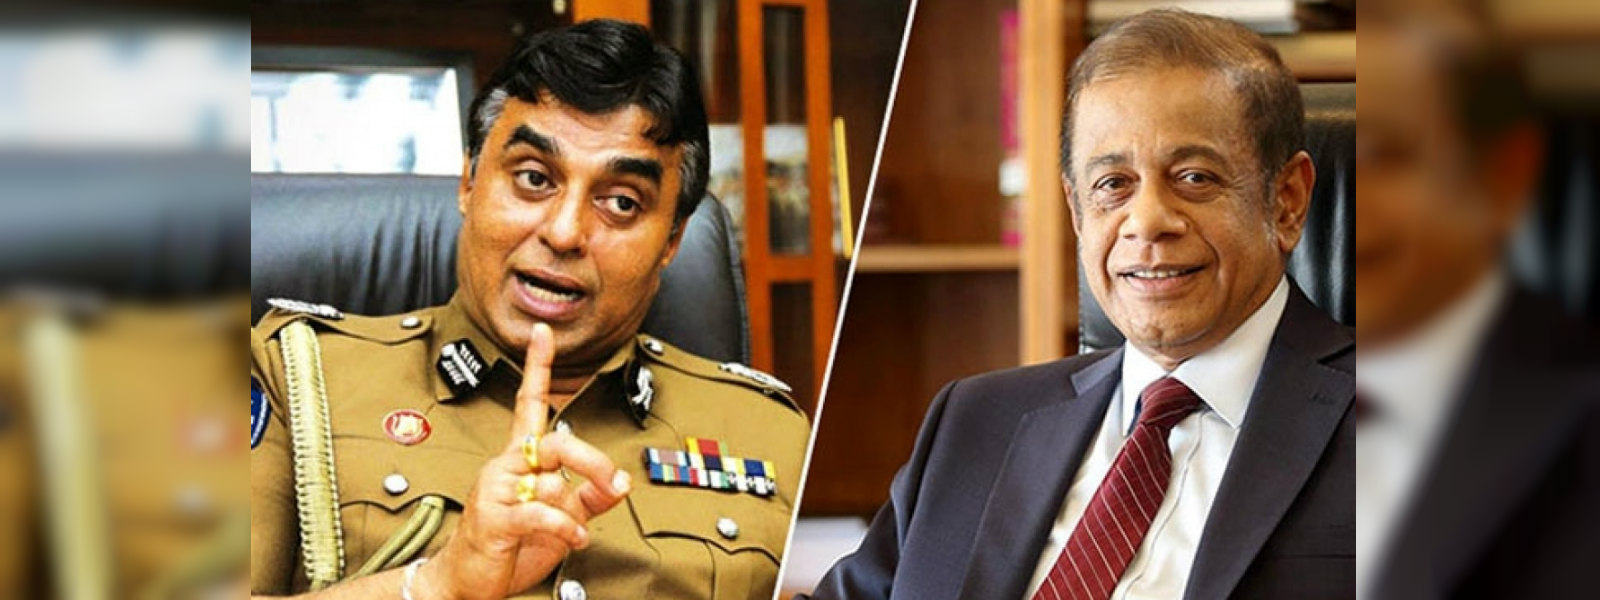 IGP and former Defence Secretary before the Parliamentary Select Committee